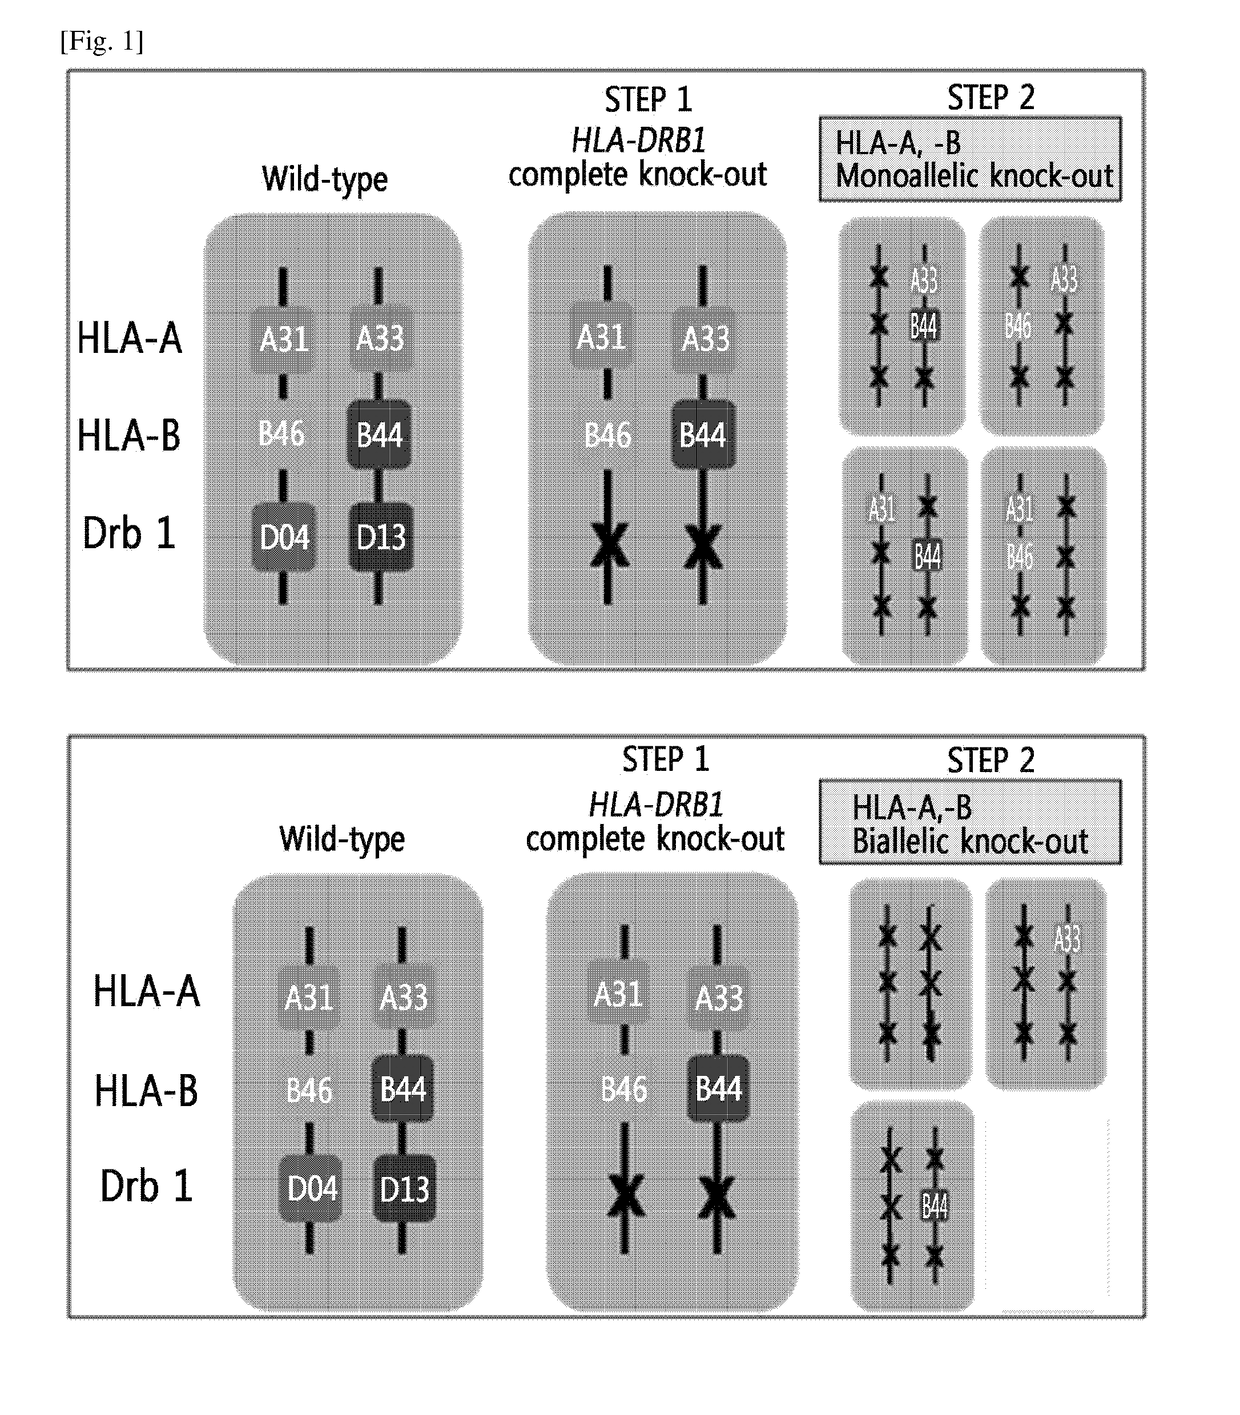 Immune-compatible cells created by nuclease-mediated editing of genes encoding HLA